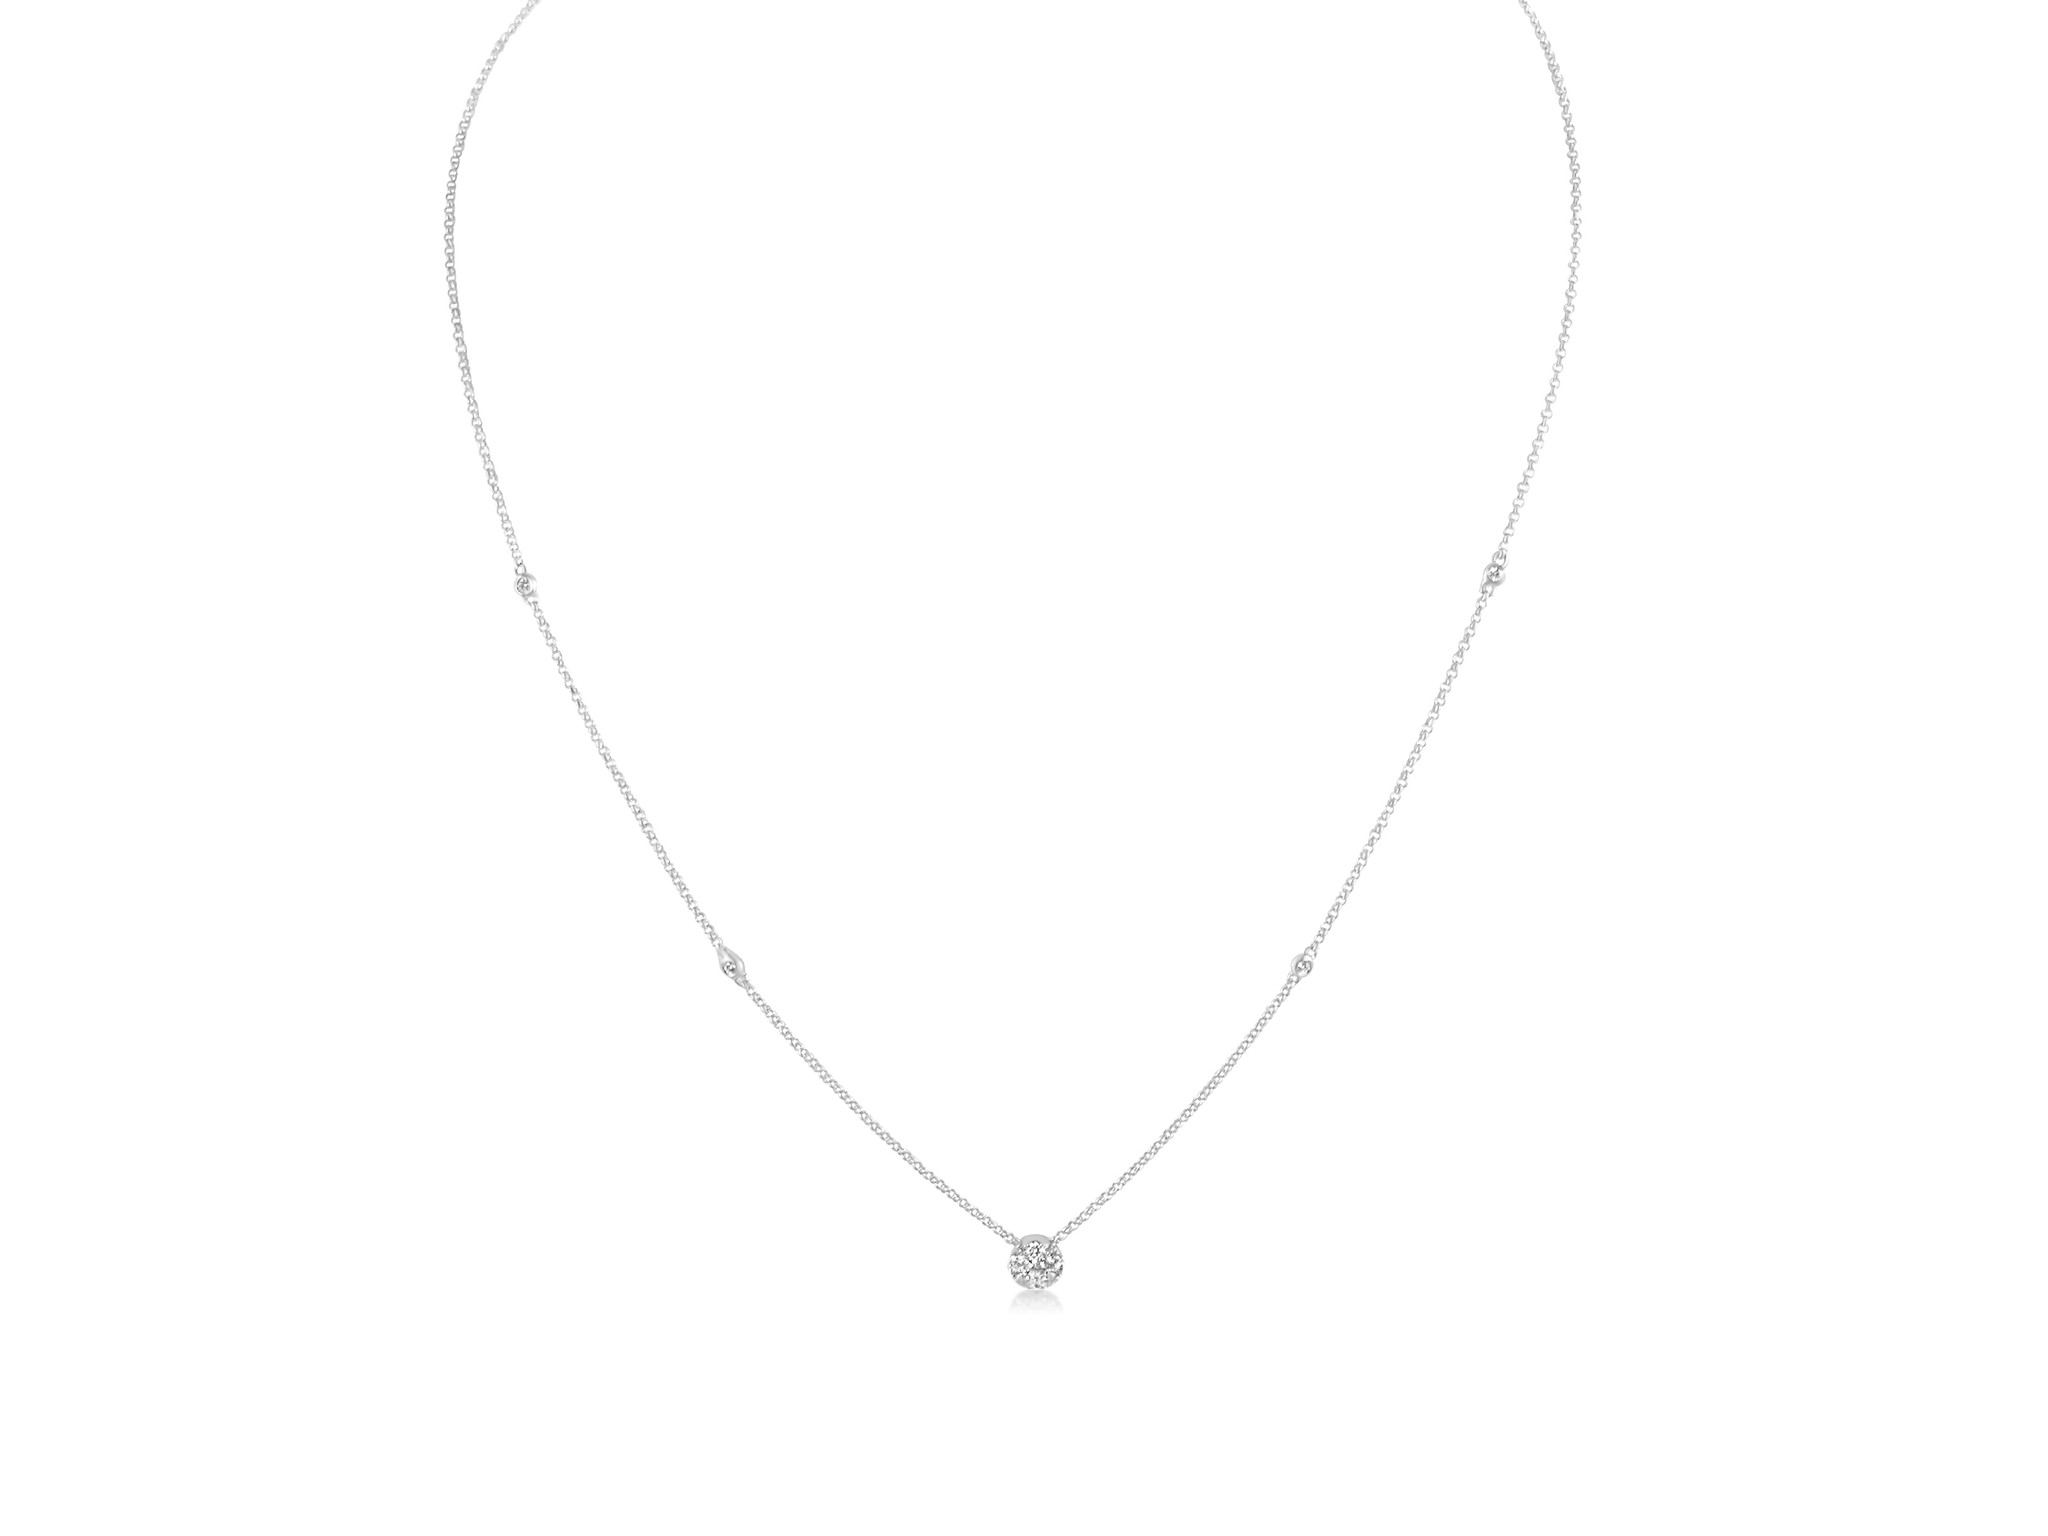 18kt white gold chain with 0.24 ct diamonds pendants